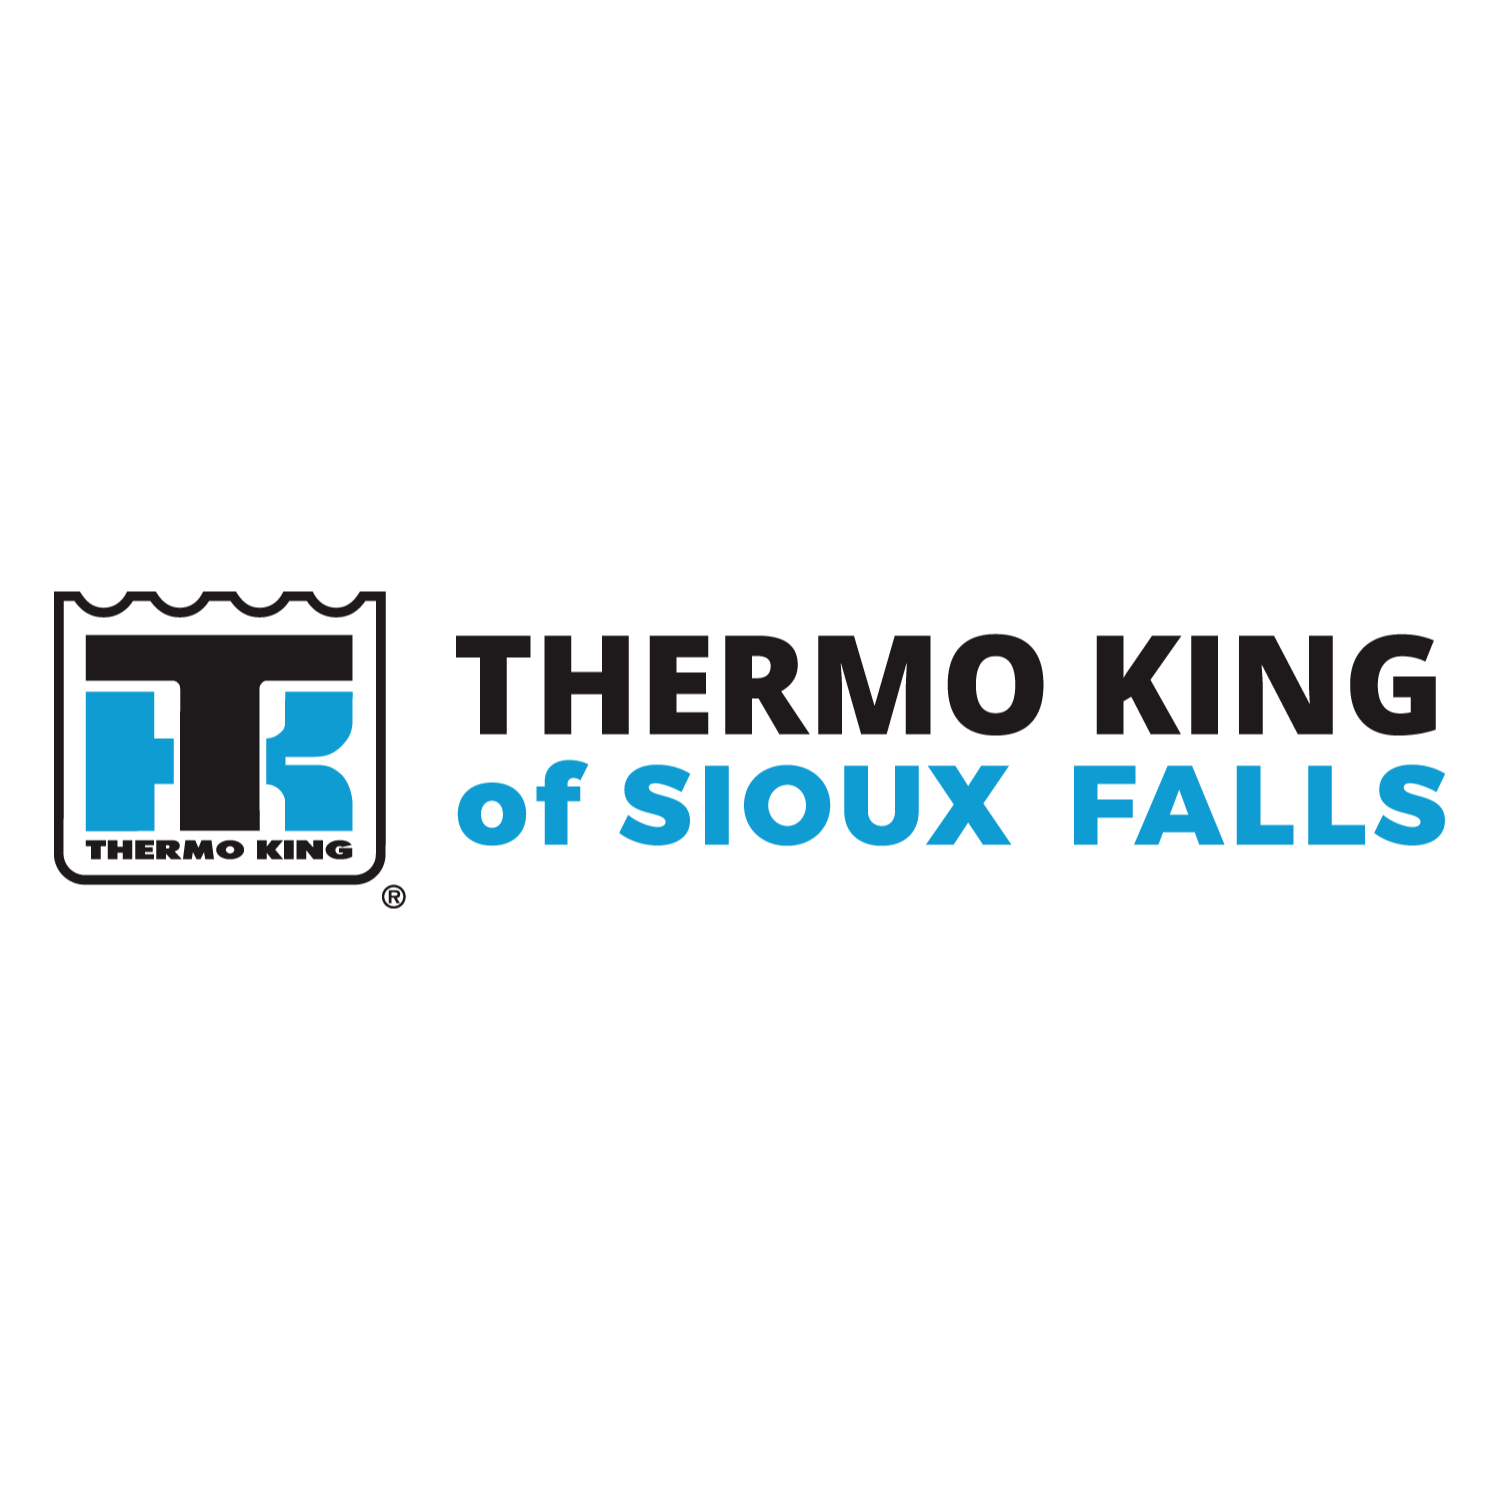 Thermo King of Sioux Falls - Sioux Falls, SD 57103 - (605)334-5162 | ShowMeLocal.com